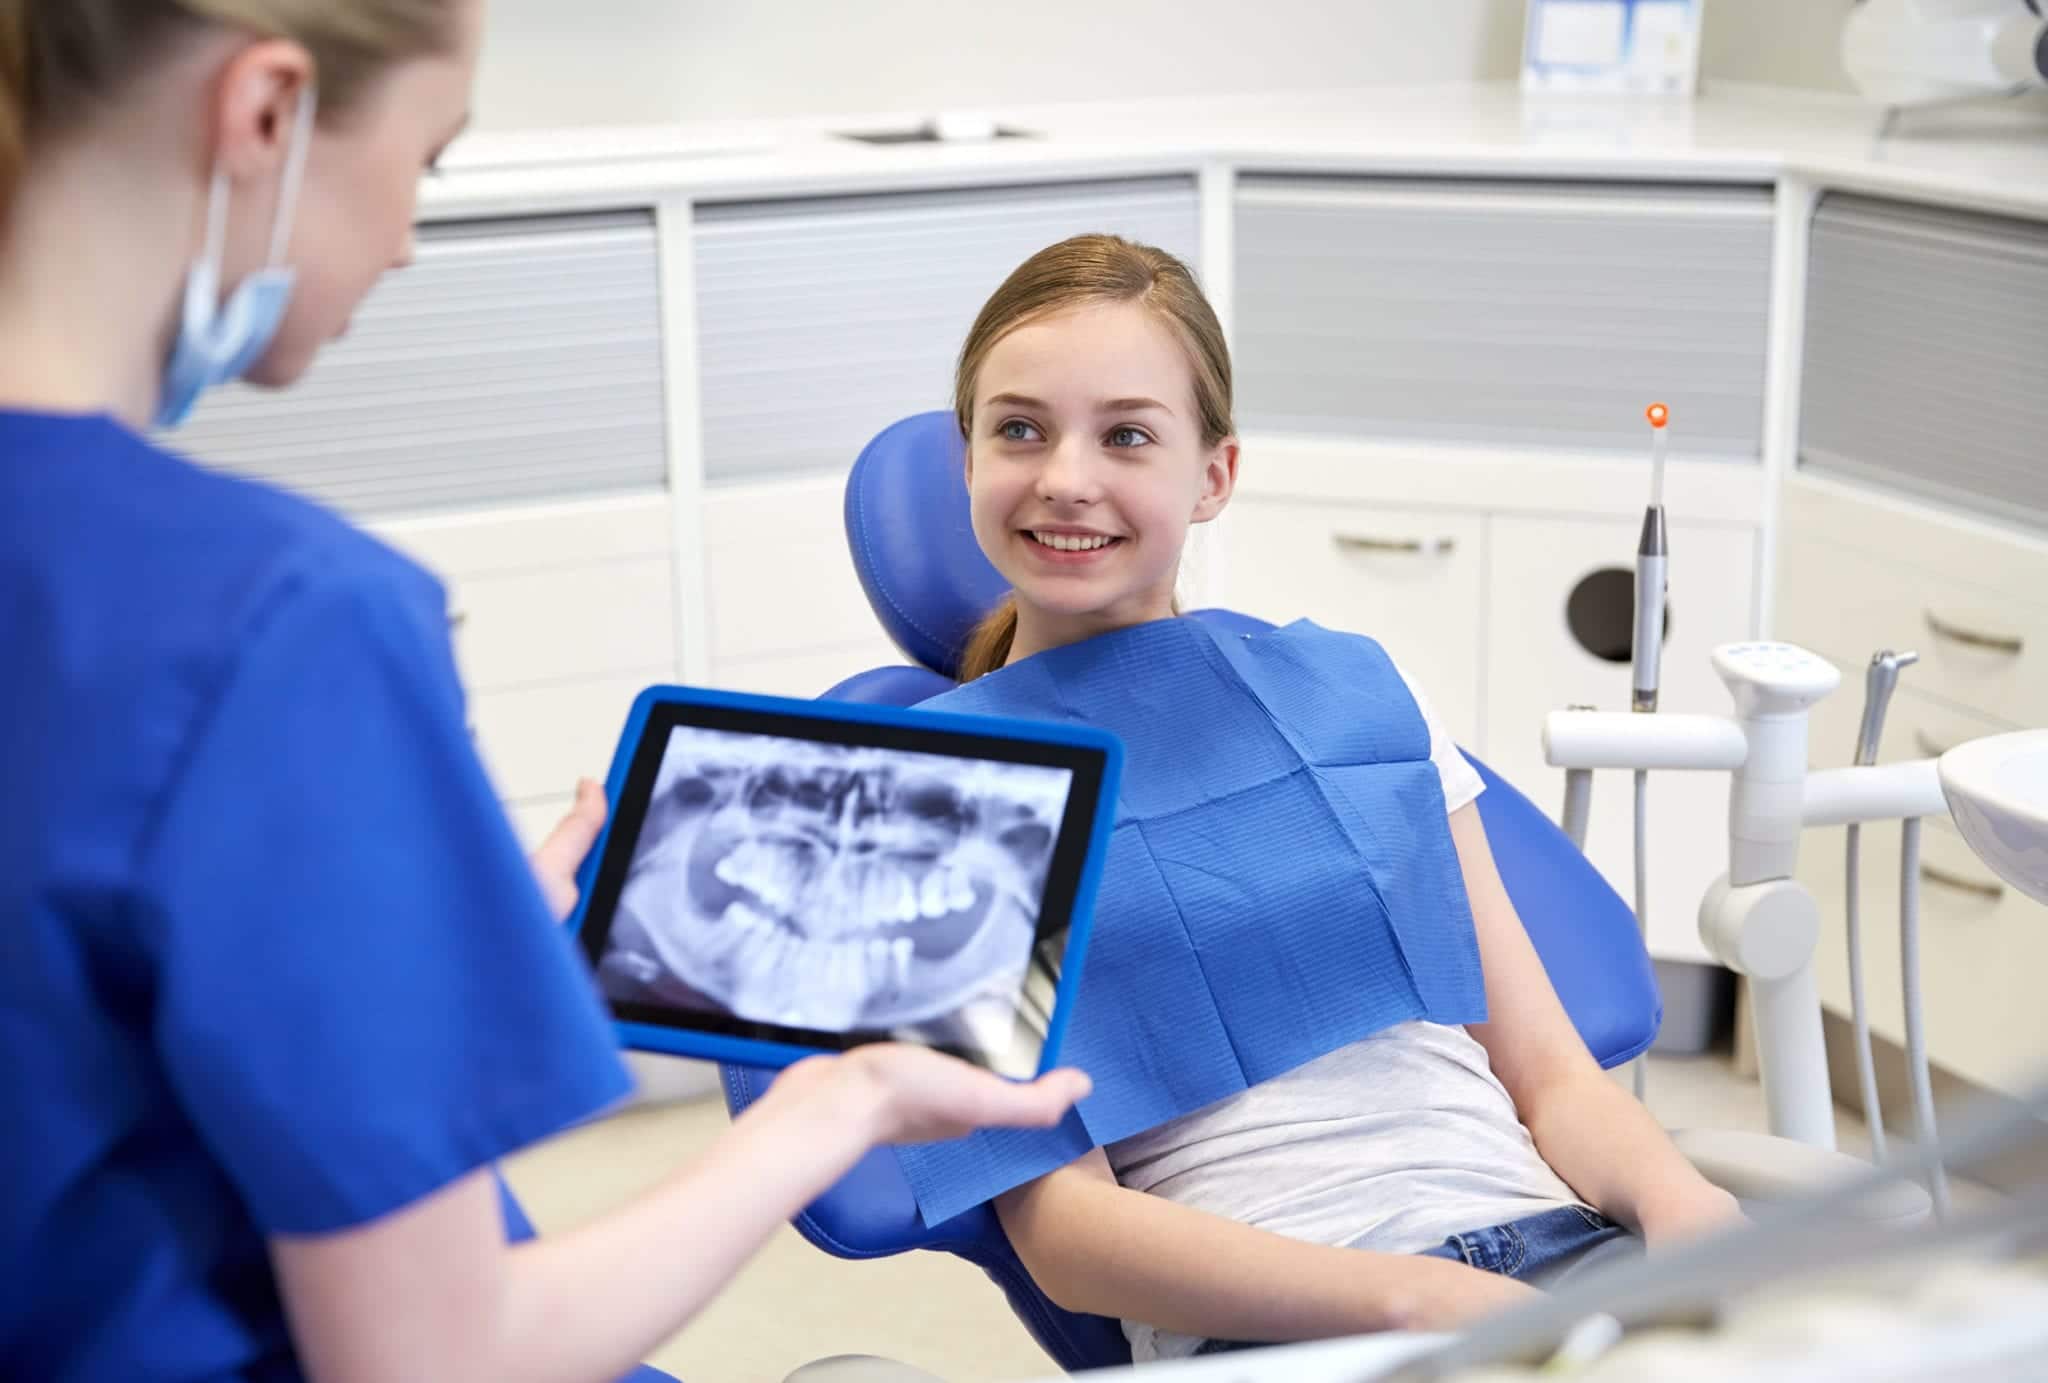 Laser Dentistry to Become Standard in Dental Practices